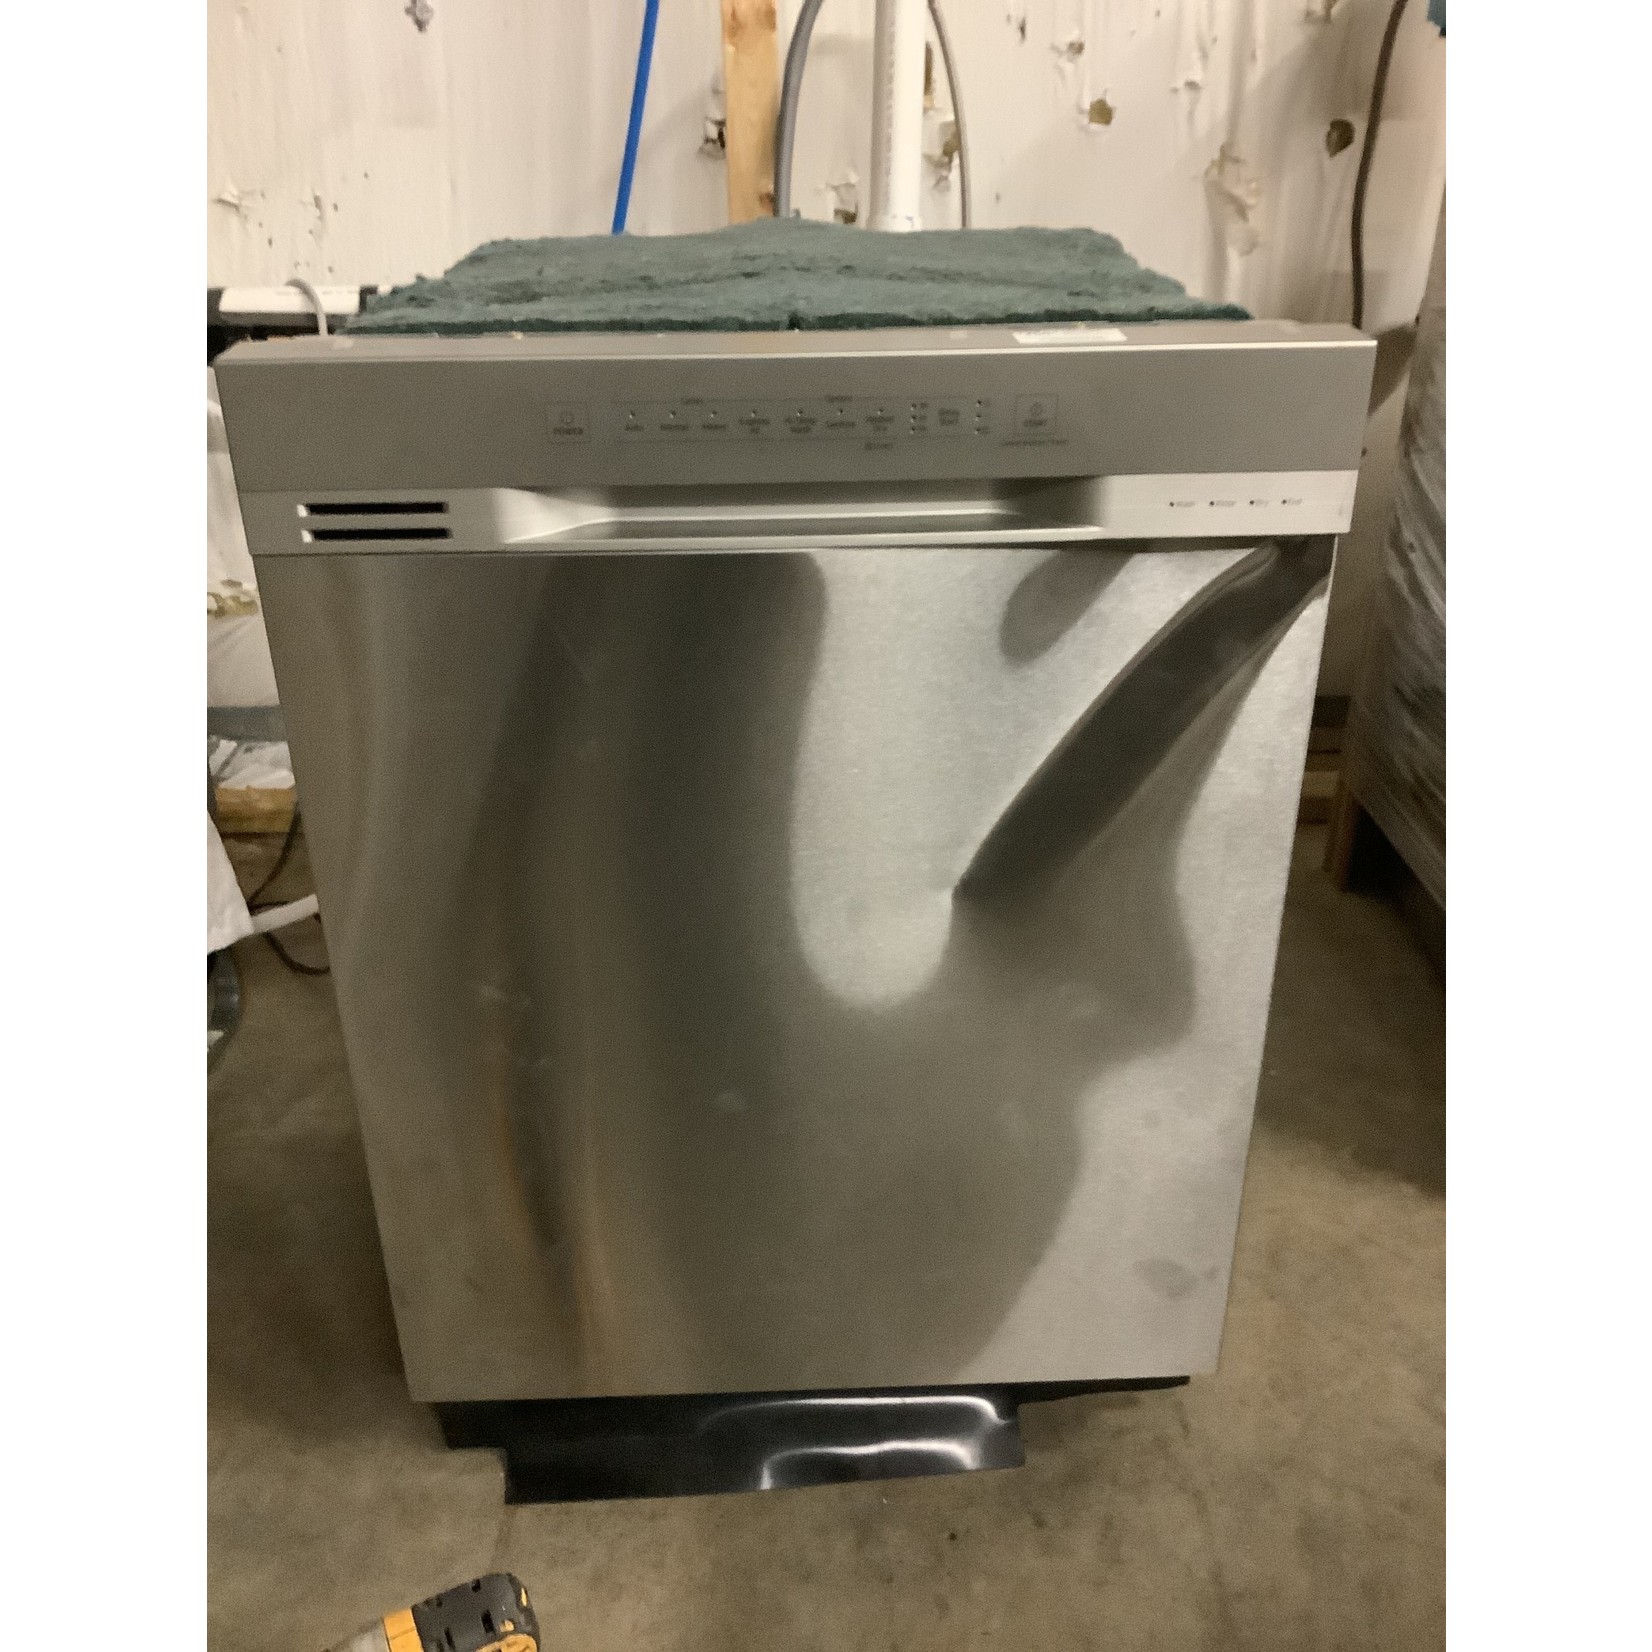 Samsung FRONT CONTROL DISHWASHER WITH STAINLESS INTERIOR